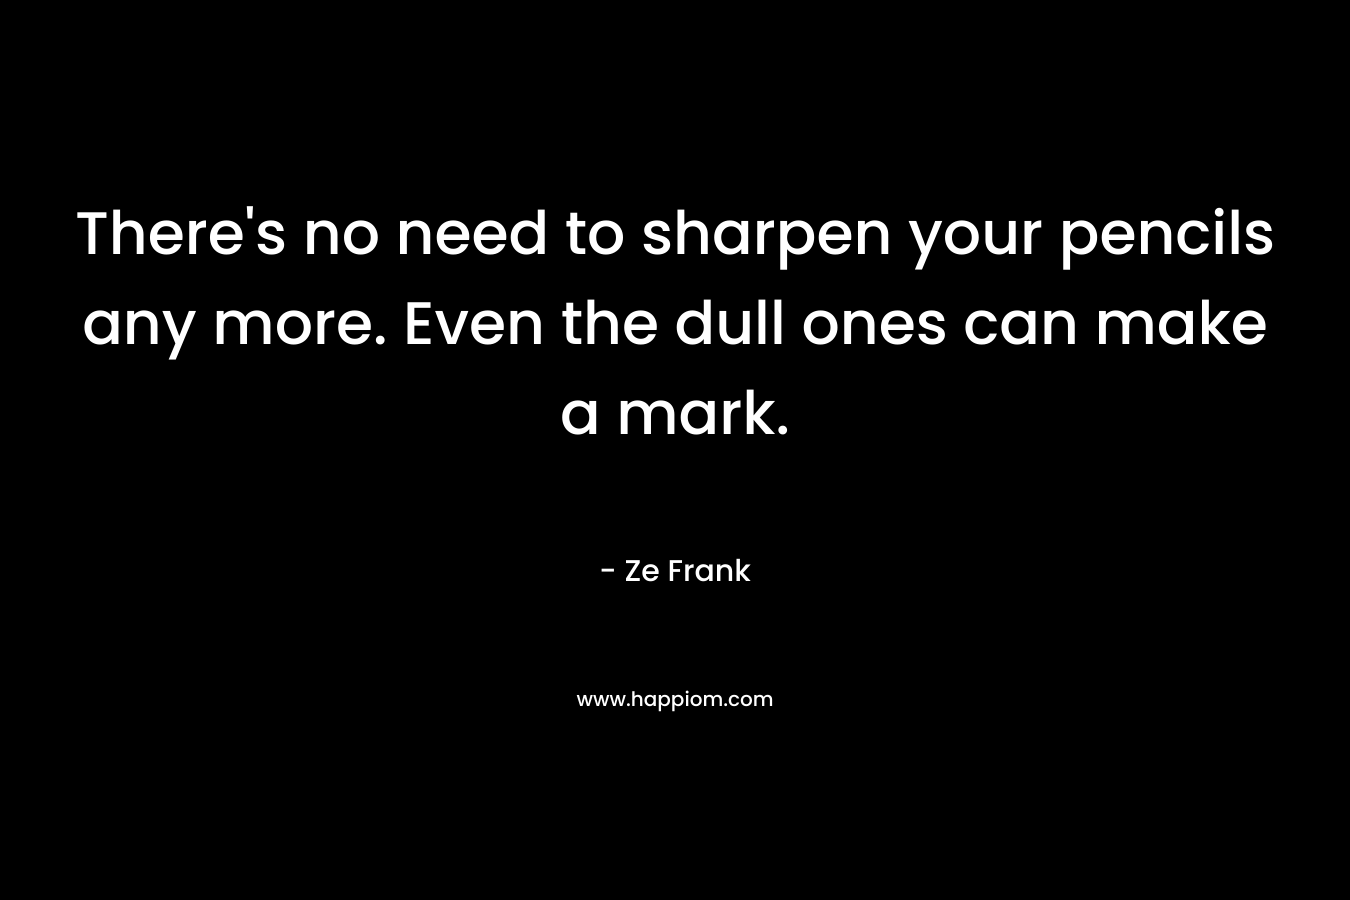 There’s no need to sharpen your pencils any more. Even the dull ones can make a mark. – Ze Frank